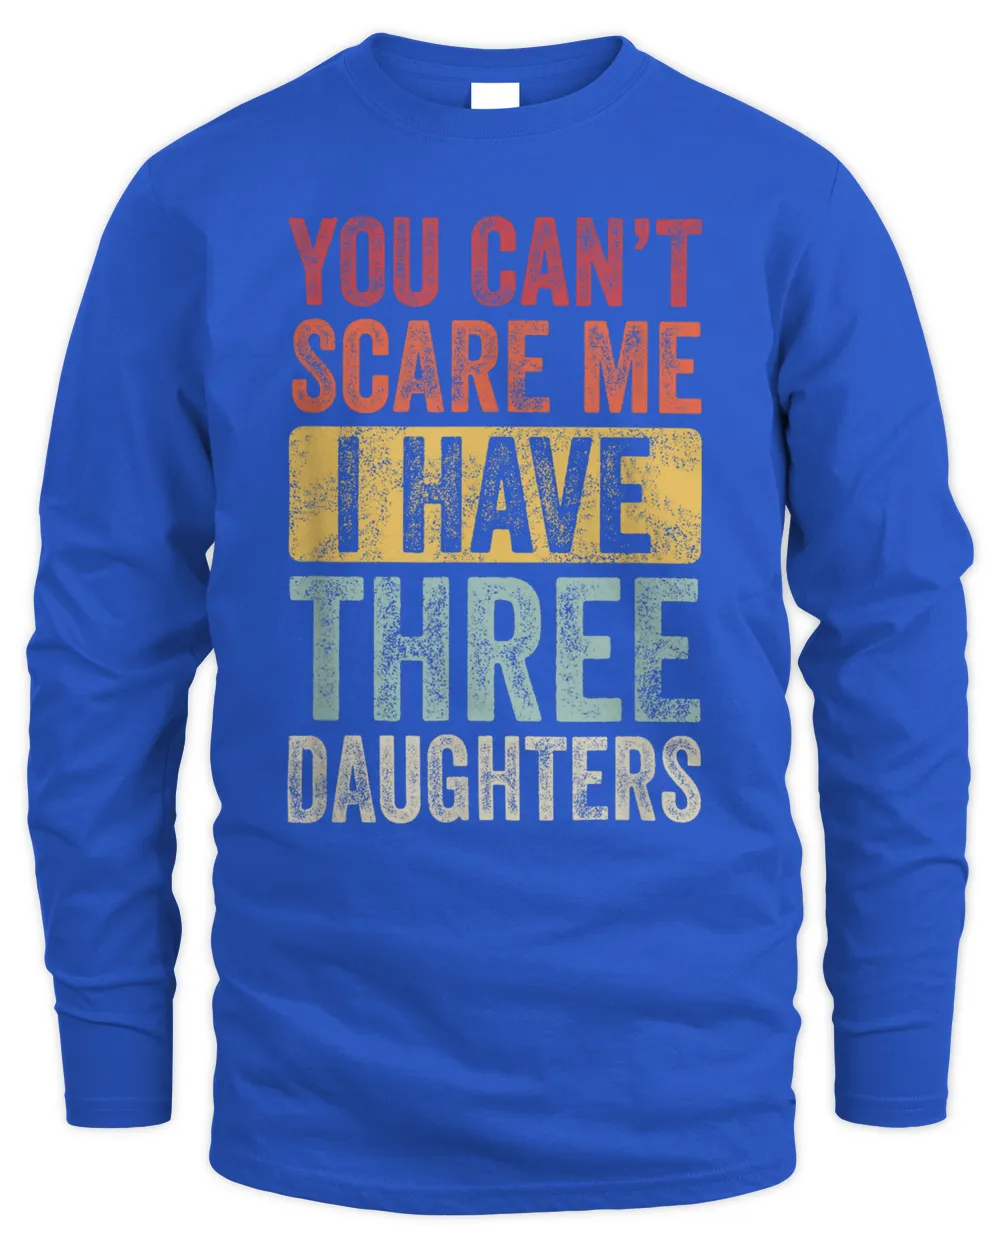 You Can't Scare Me I Have Three Daughters | Retro Funny Dad T-Shirt